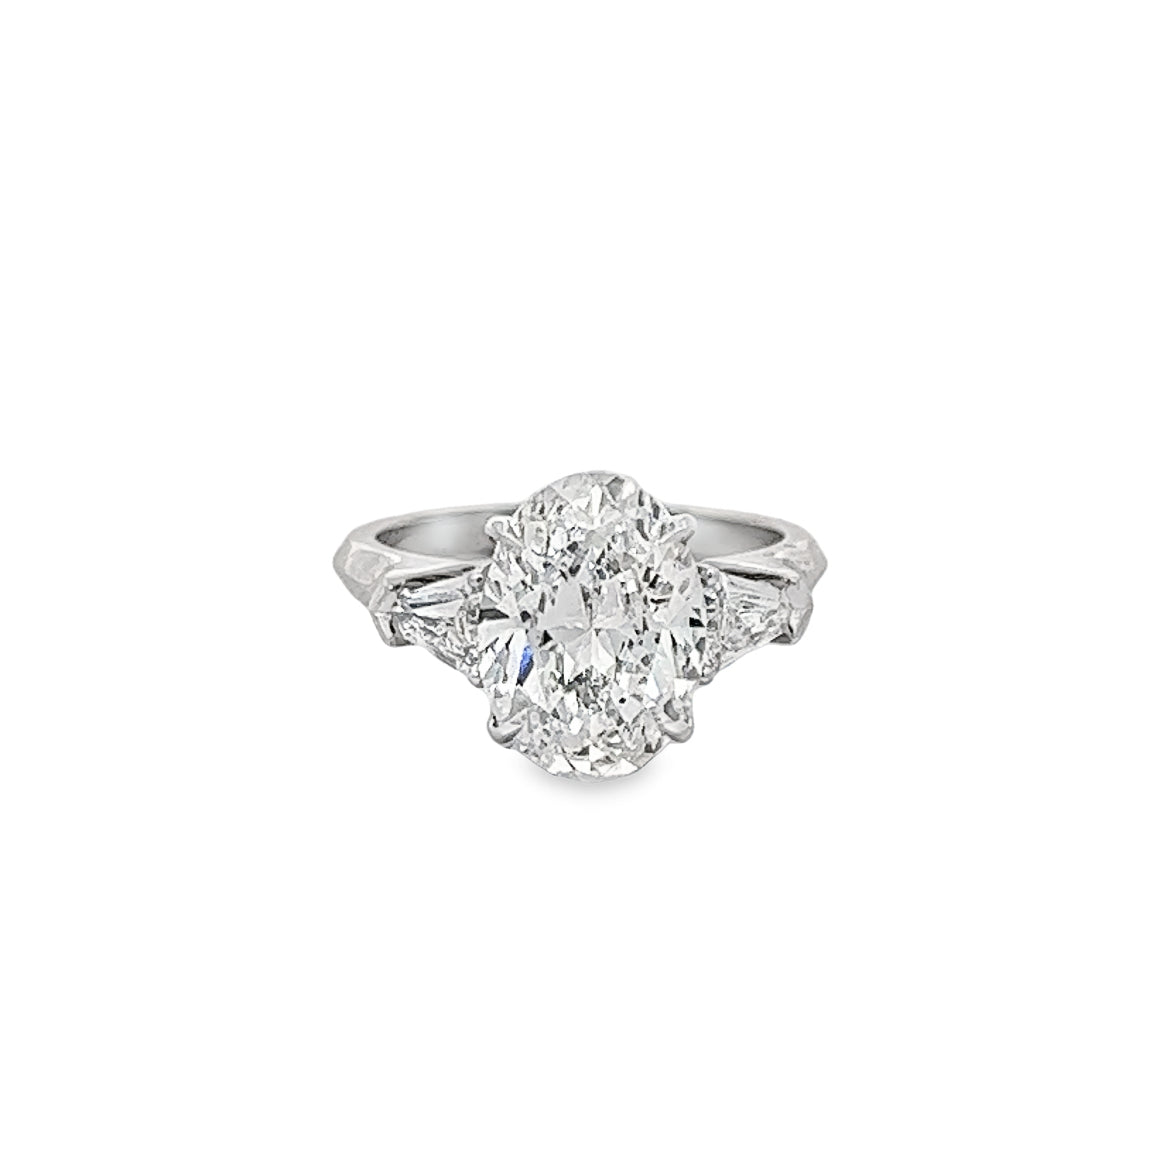 The Classic 3 Platinum Oval Engagement Ring with Trillion Side Stones